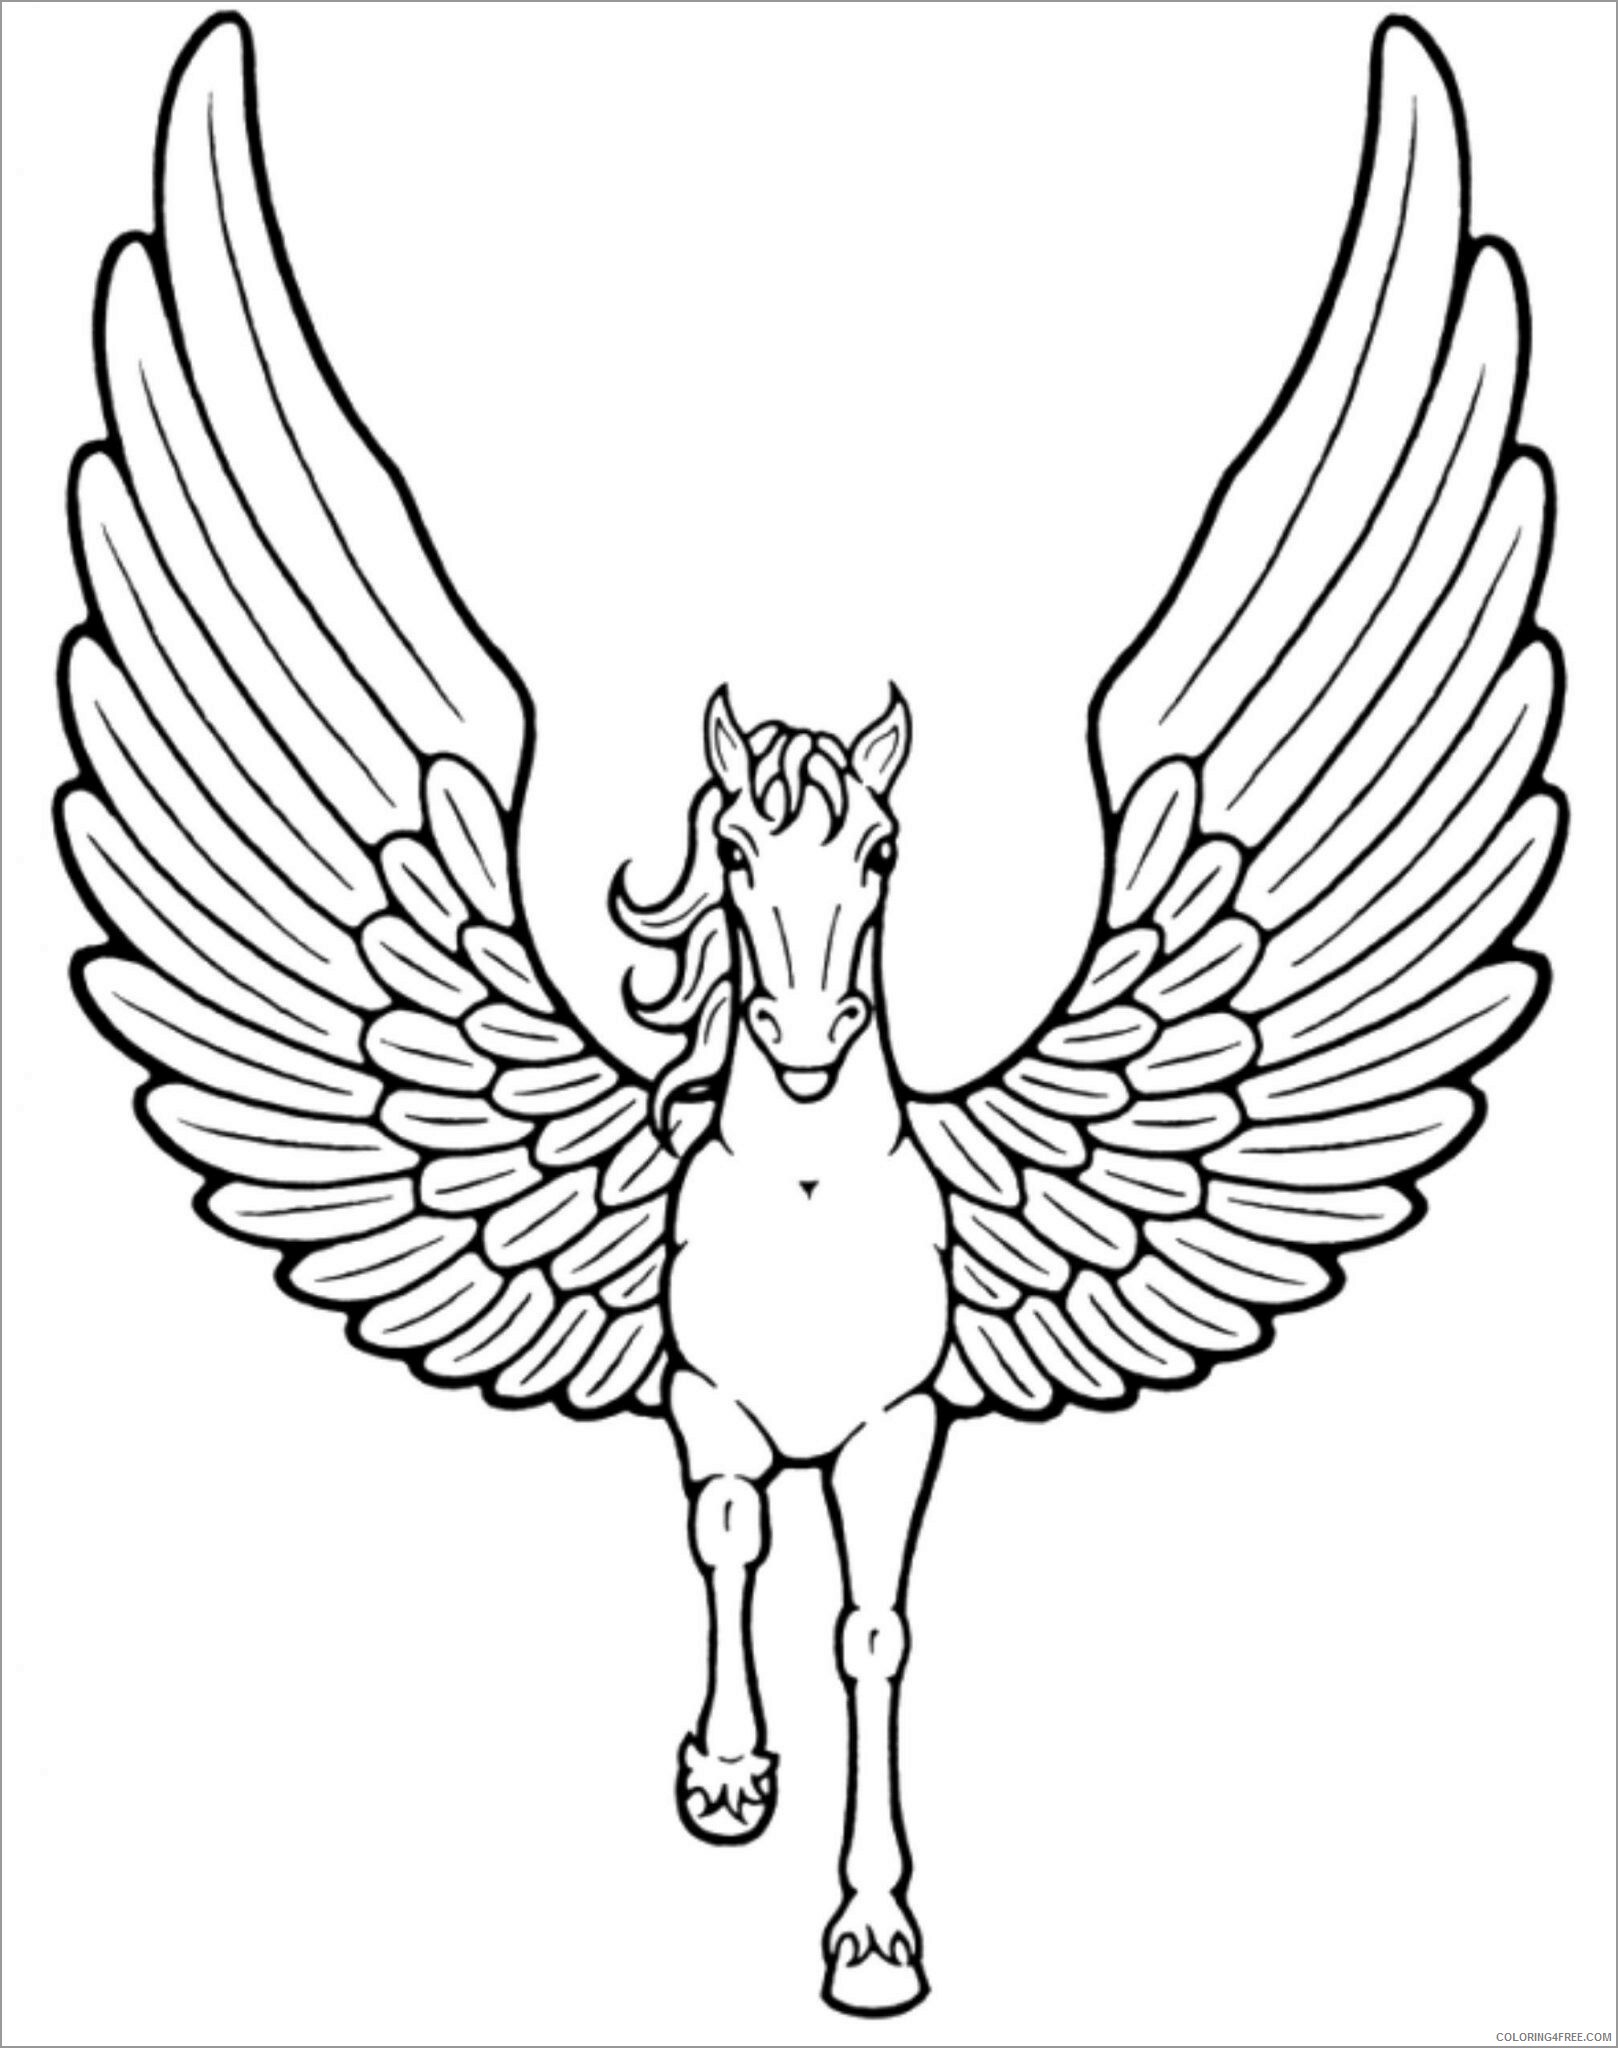 Winged Unicorn Coloring Pages winged unicorn Printable 2021 6302 Coloring4free